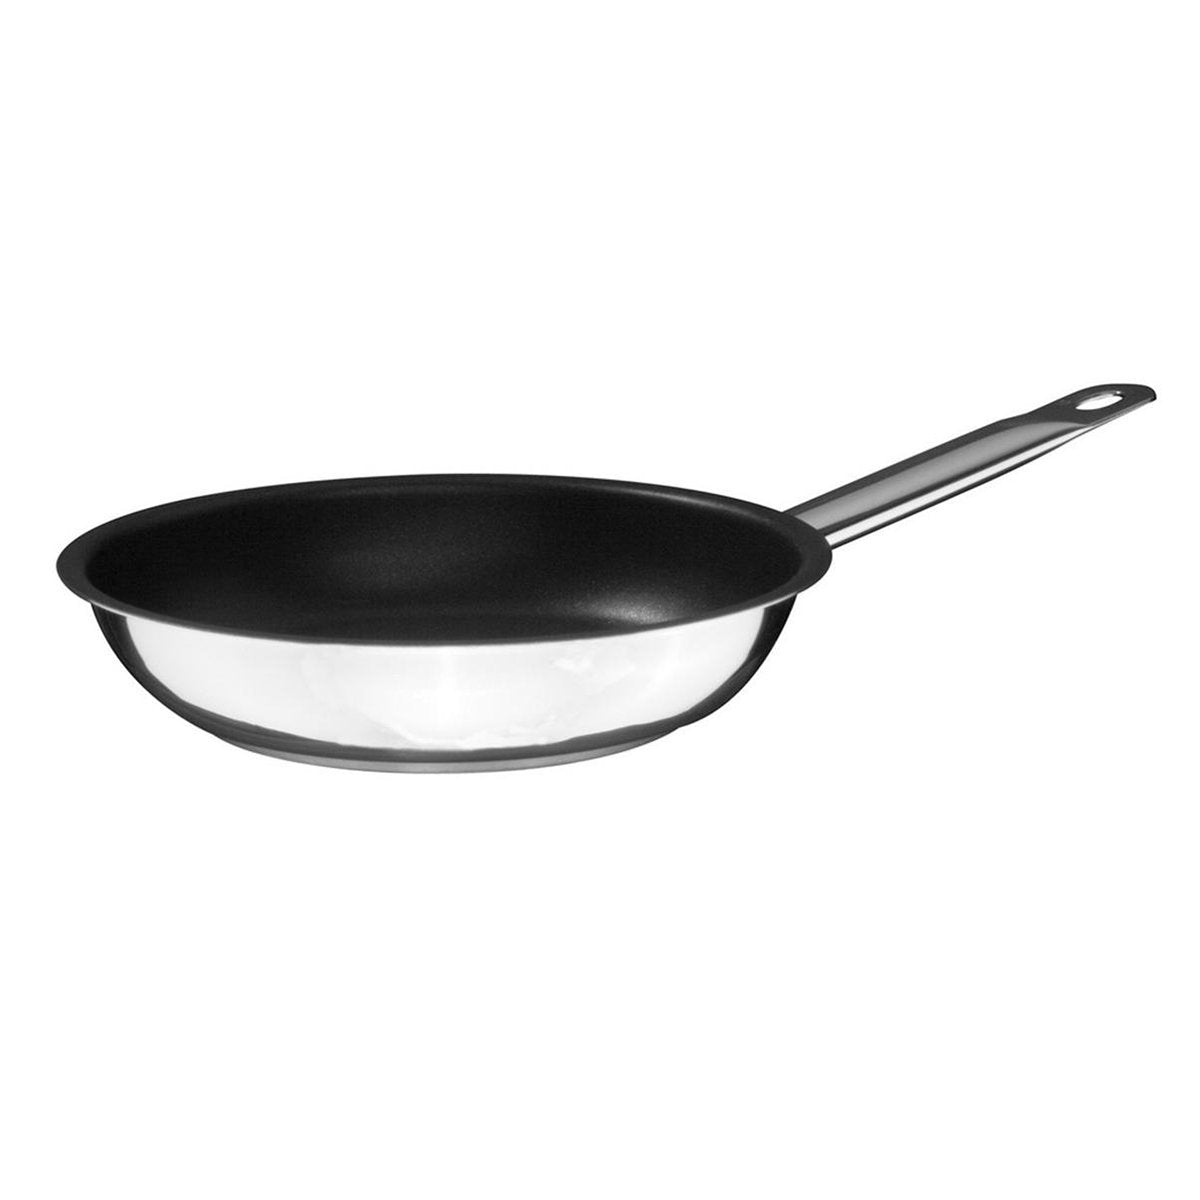 S/S FRYPAN, NON STICK COATED , MIRRIR FINISHED, Size:28X05 cm. - Mabrook Hotel Supplies